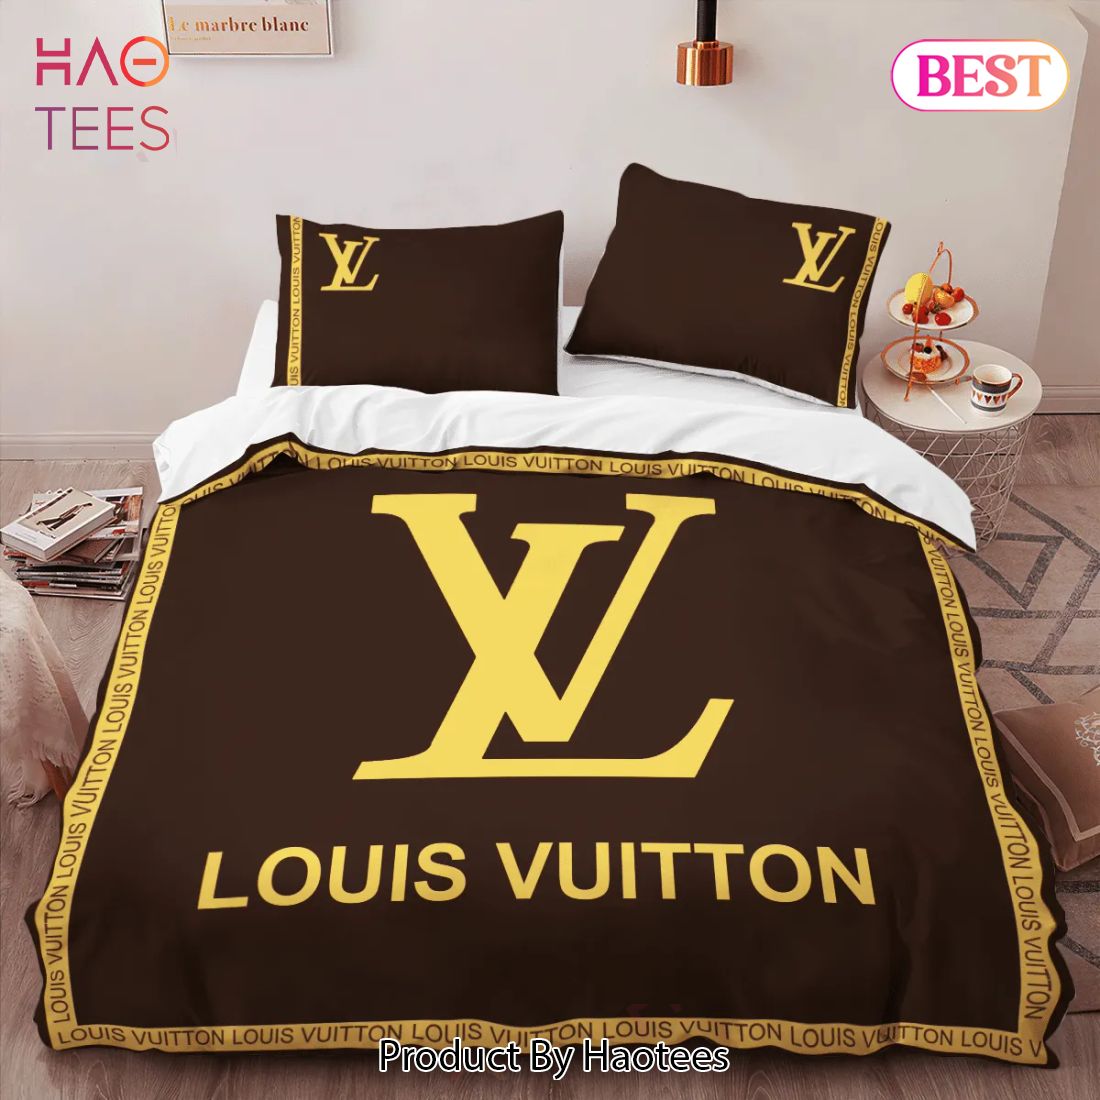 SALE] Louis Vuitton Yellow Limited Edition Luxury Brand Bedding